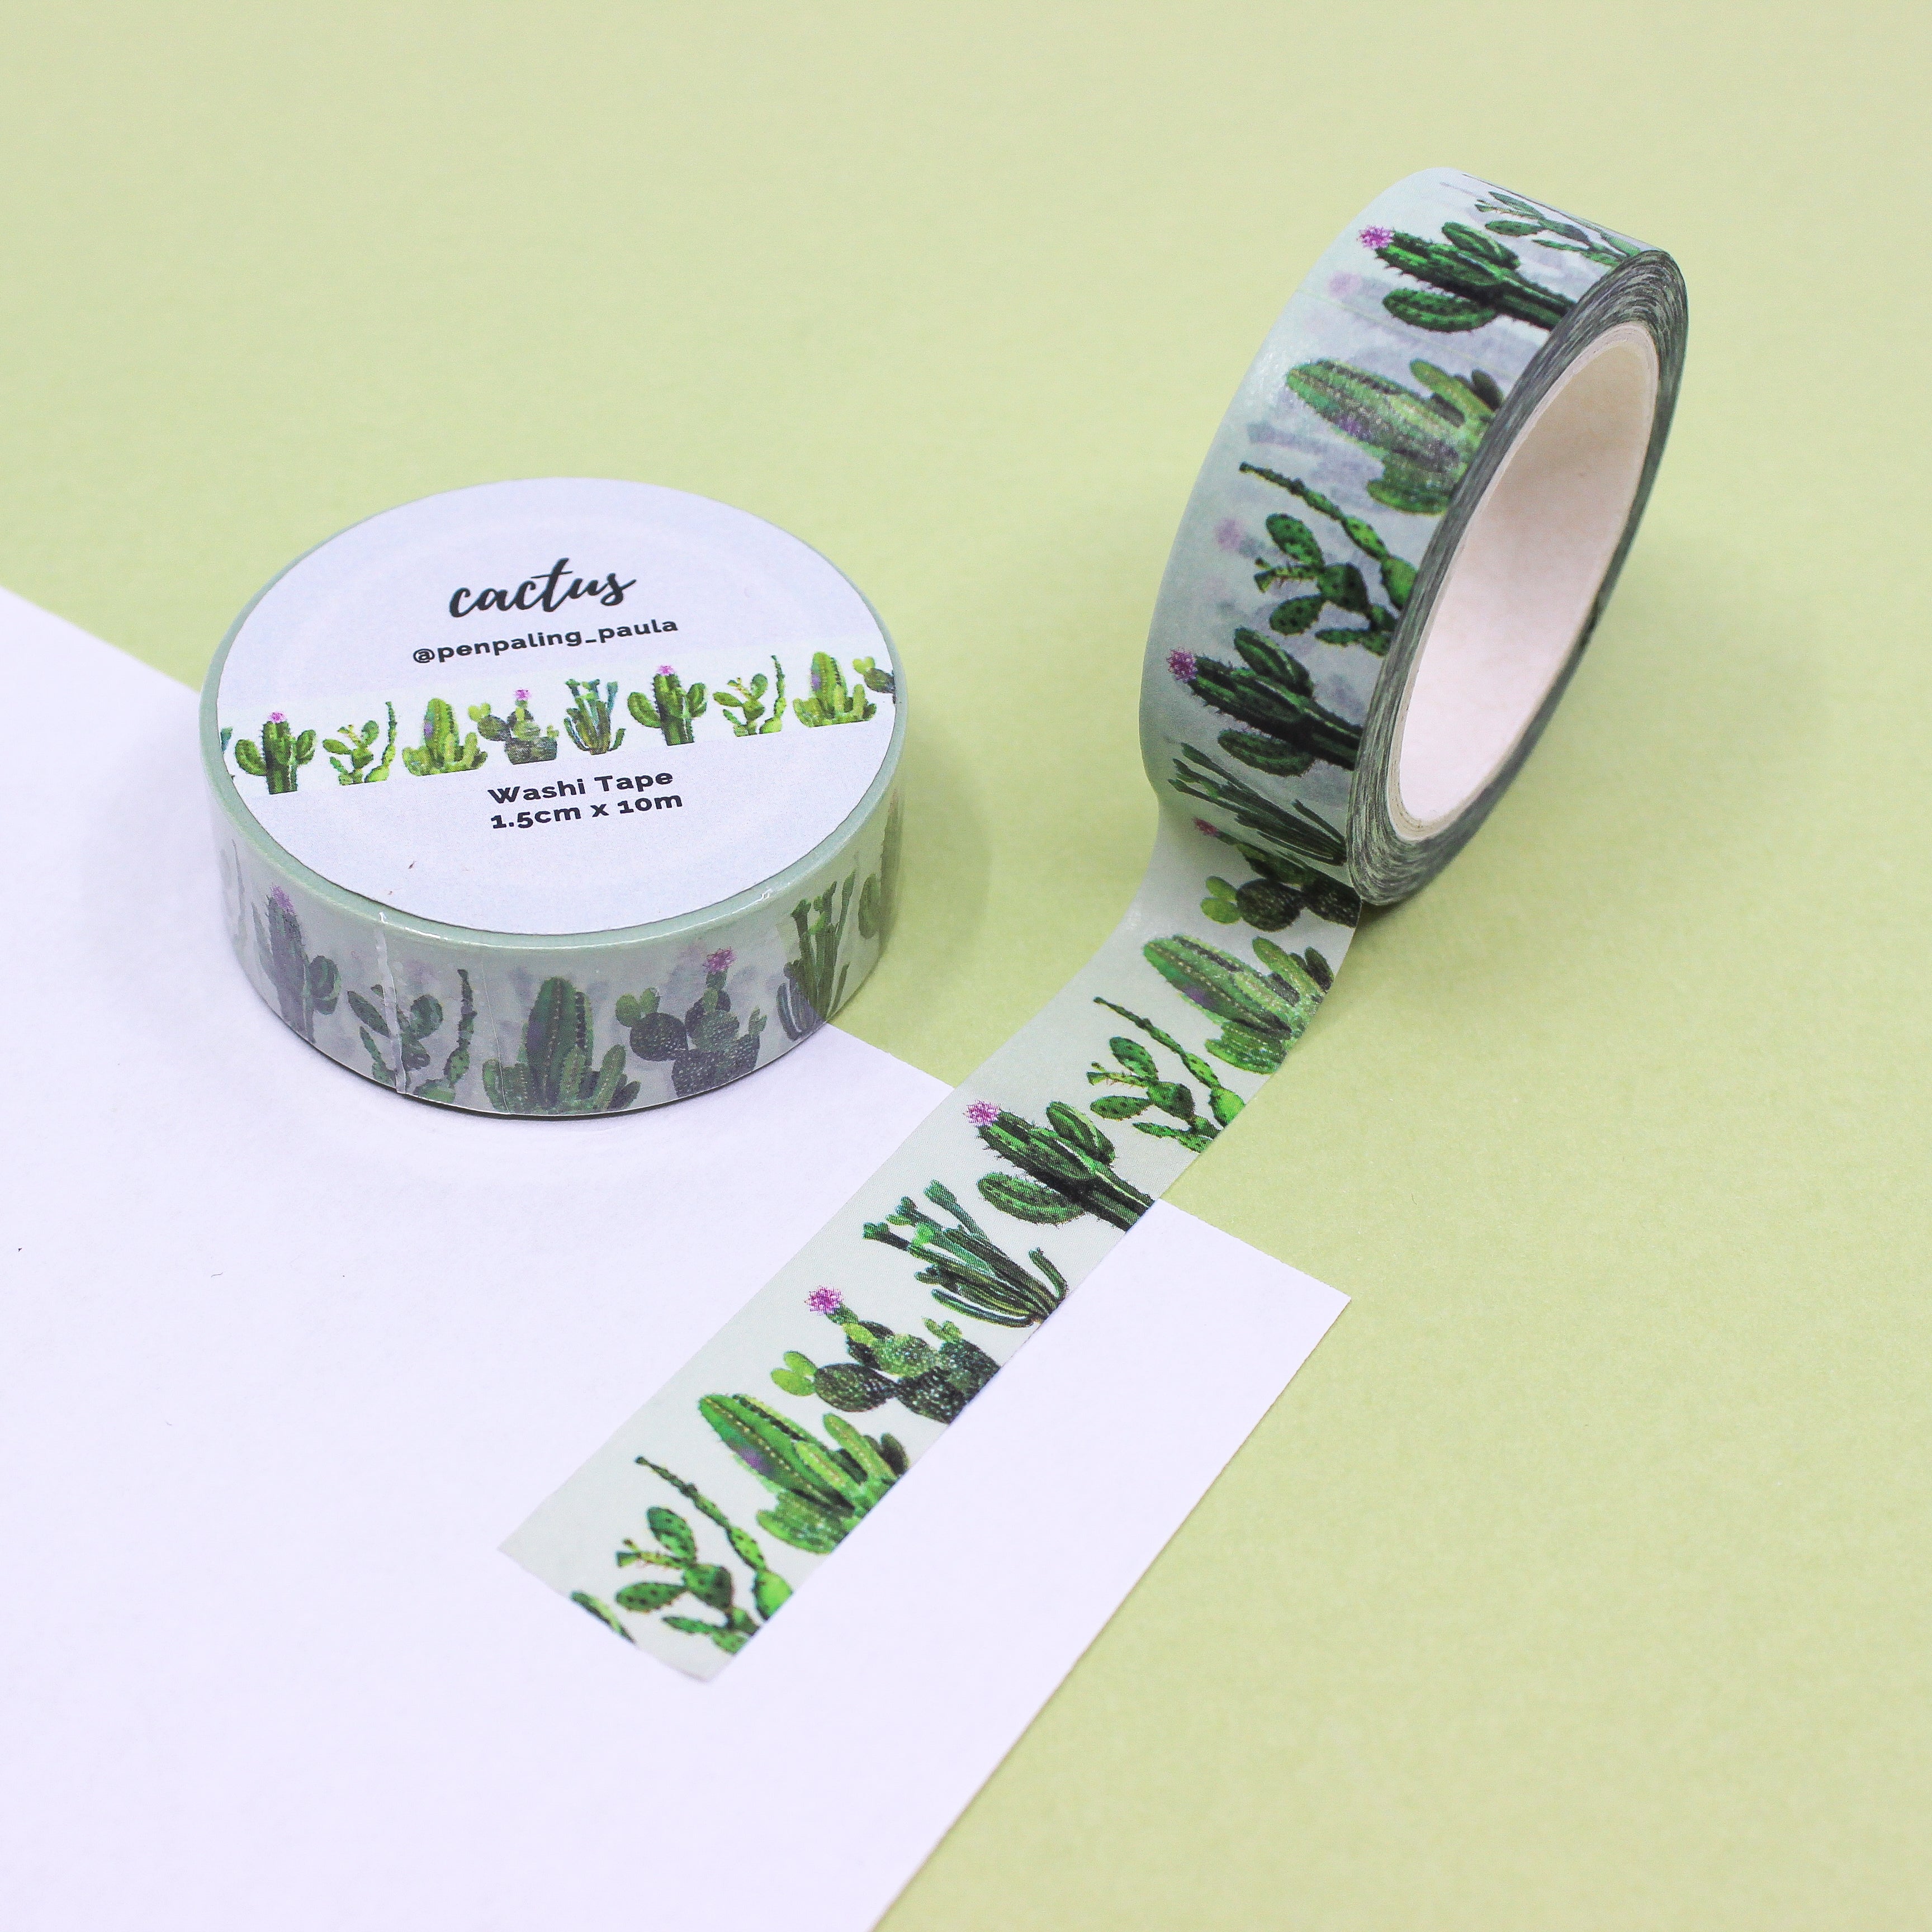 This is a green cactus themed washi tape from BBB Supplies Craft Shop